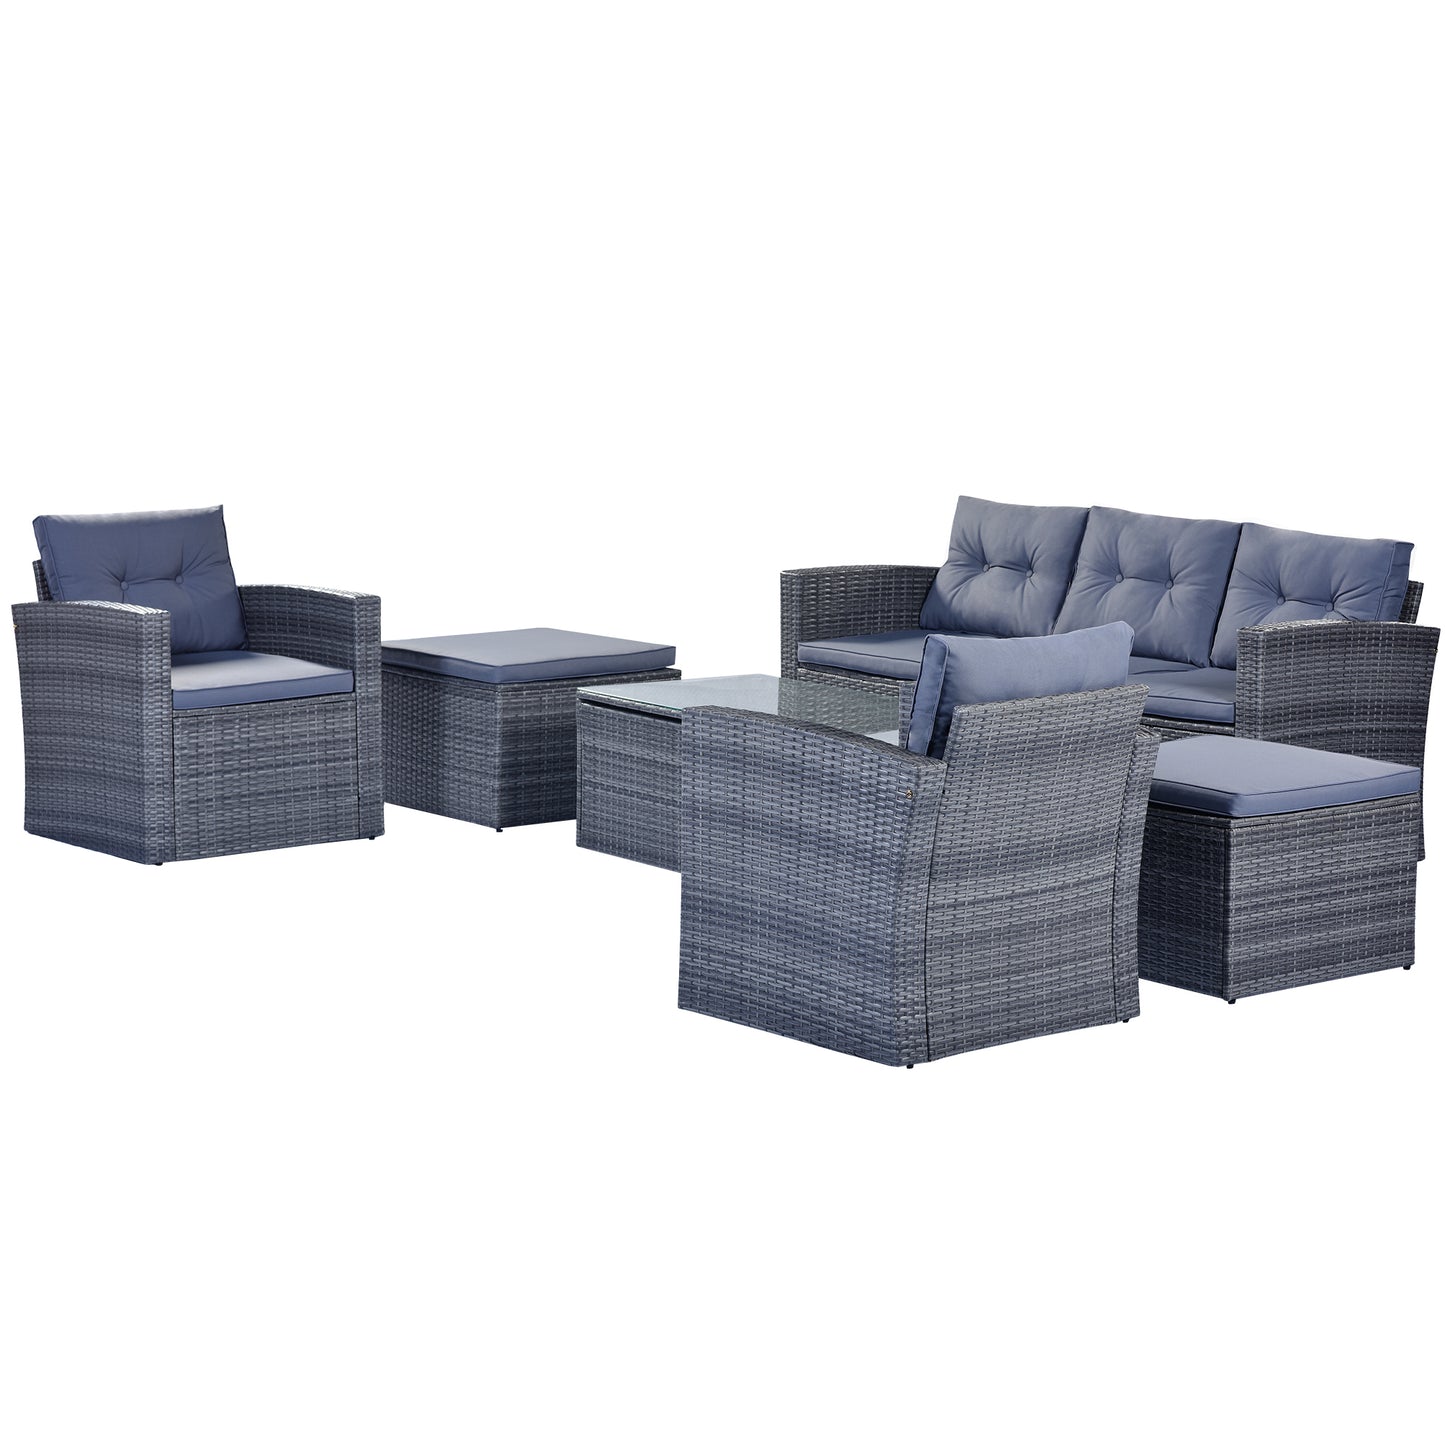 GO 6-piece All-Weather Wicker PE rattan Patio Outdoor Dining Conversation Sectional Set with coffee table, wicker sofas, ottomans,  removable cushions (Dark grey wicker, Light grey cushion)